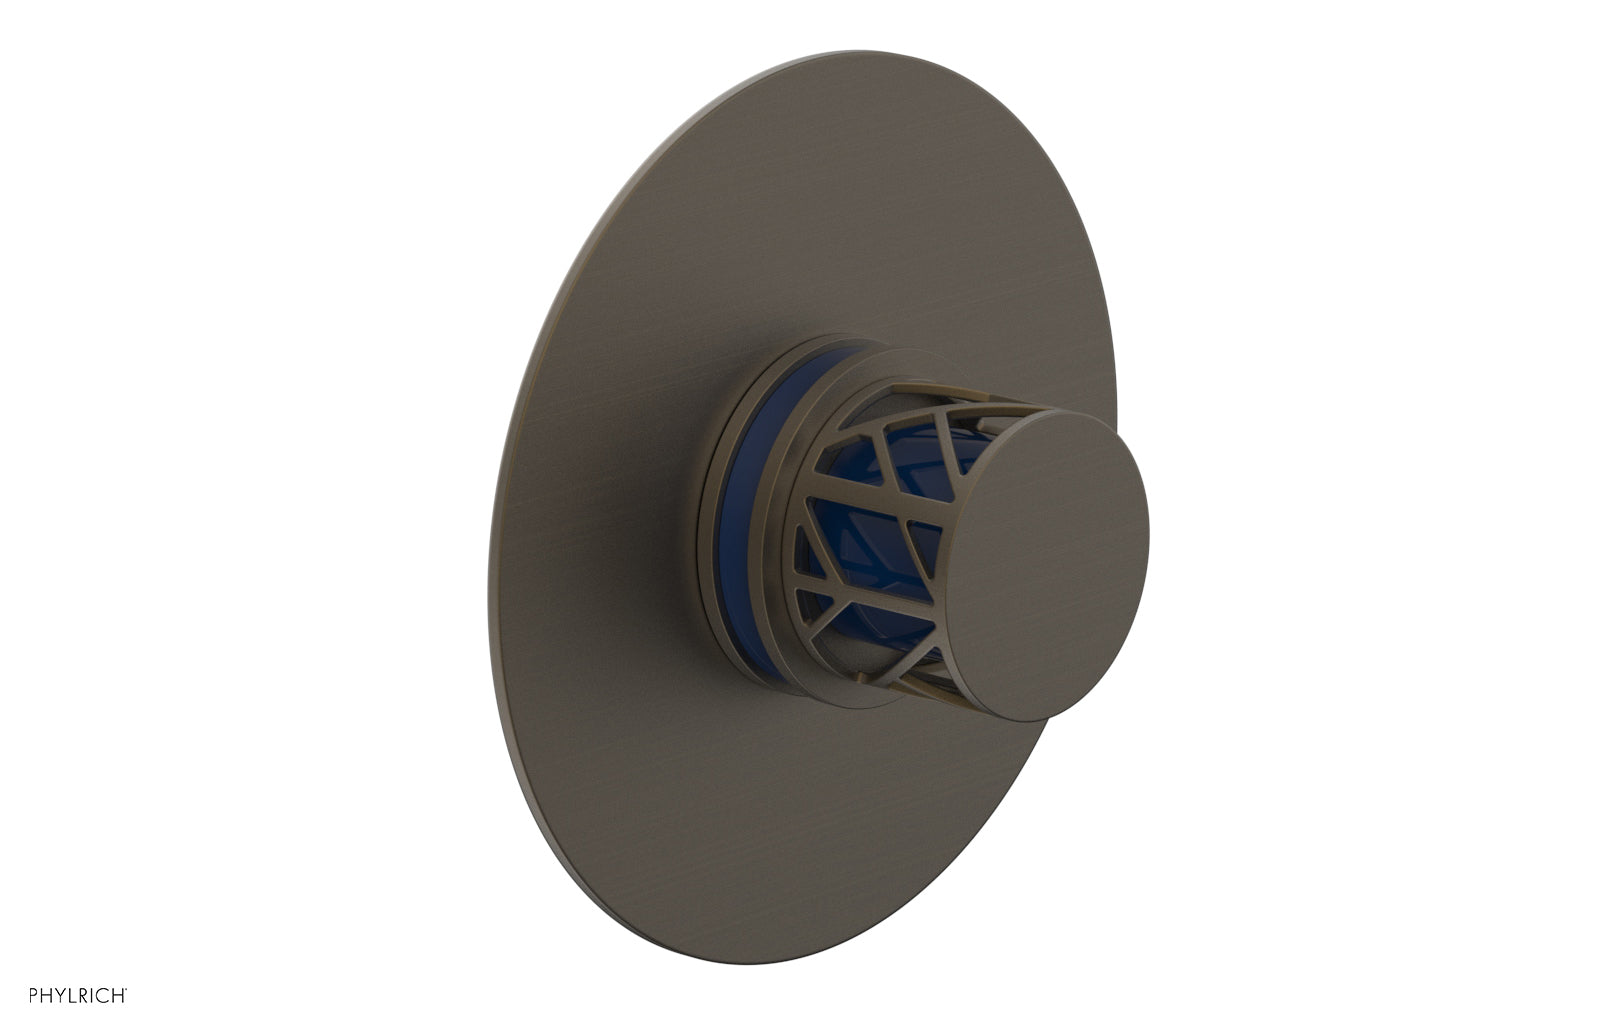 Phylrich JOLIE Pressure Balance Shower Plate & Handle Trim, Round Handle with "Navy Blue" Accents